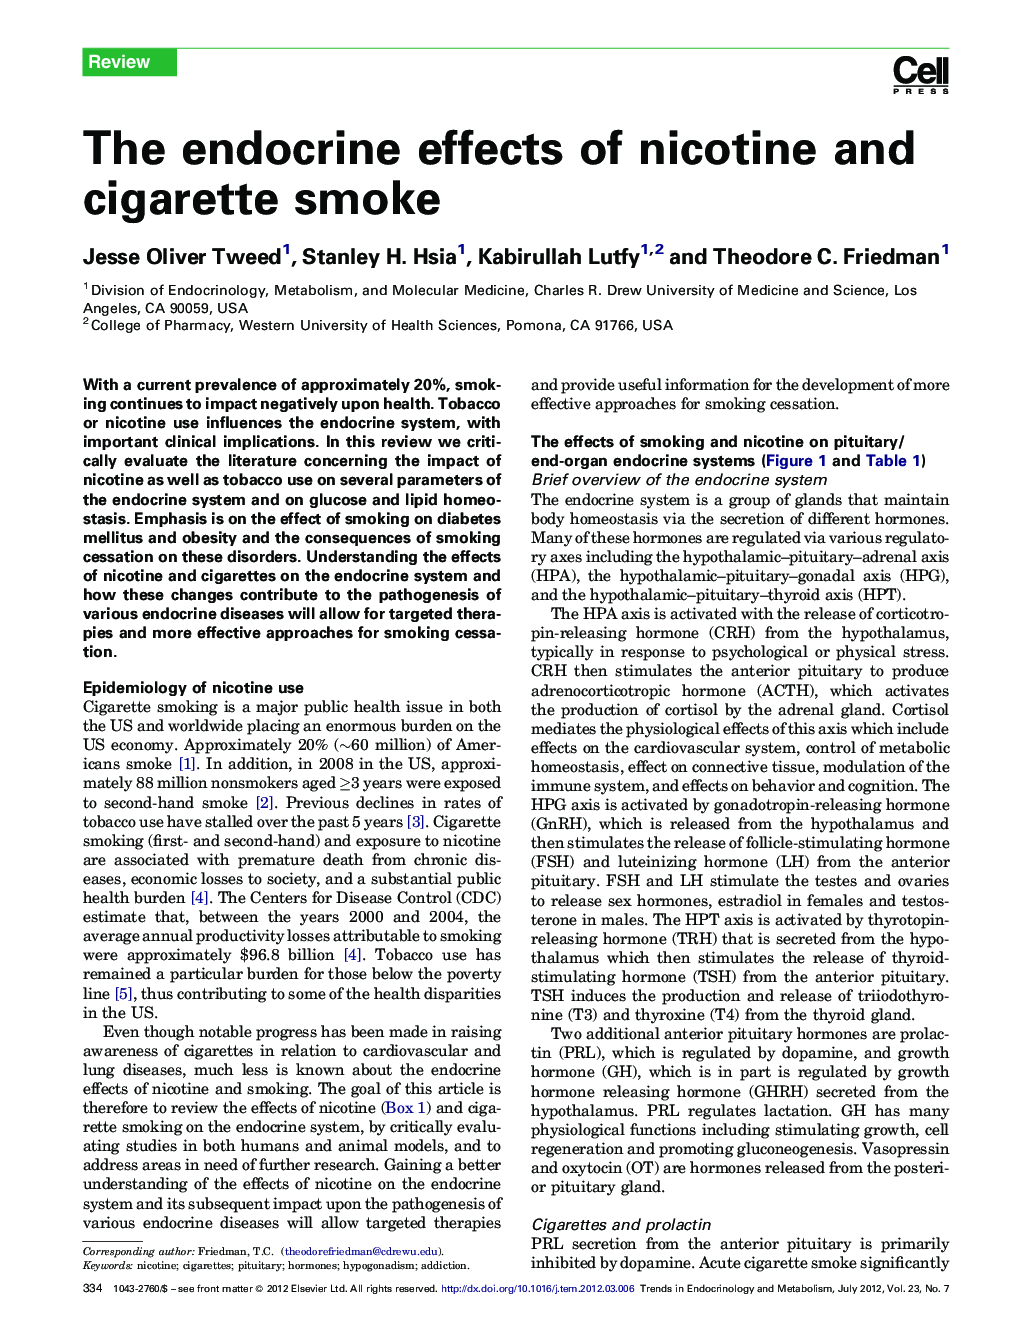 The endocrine effects of nicotine and cigarette smoke